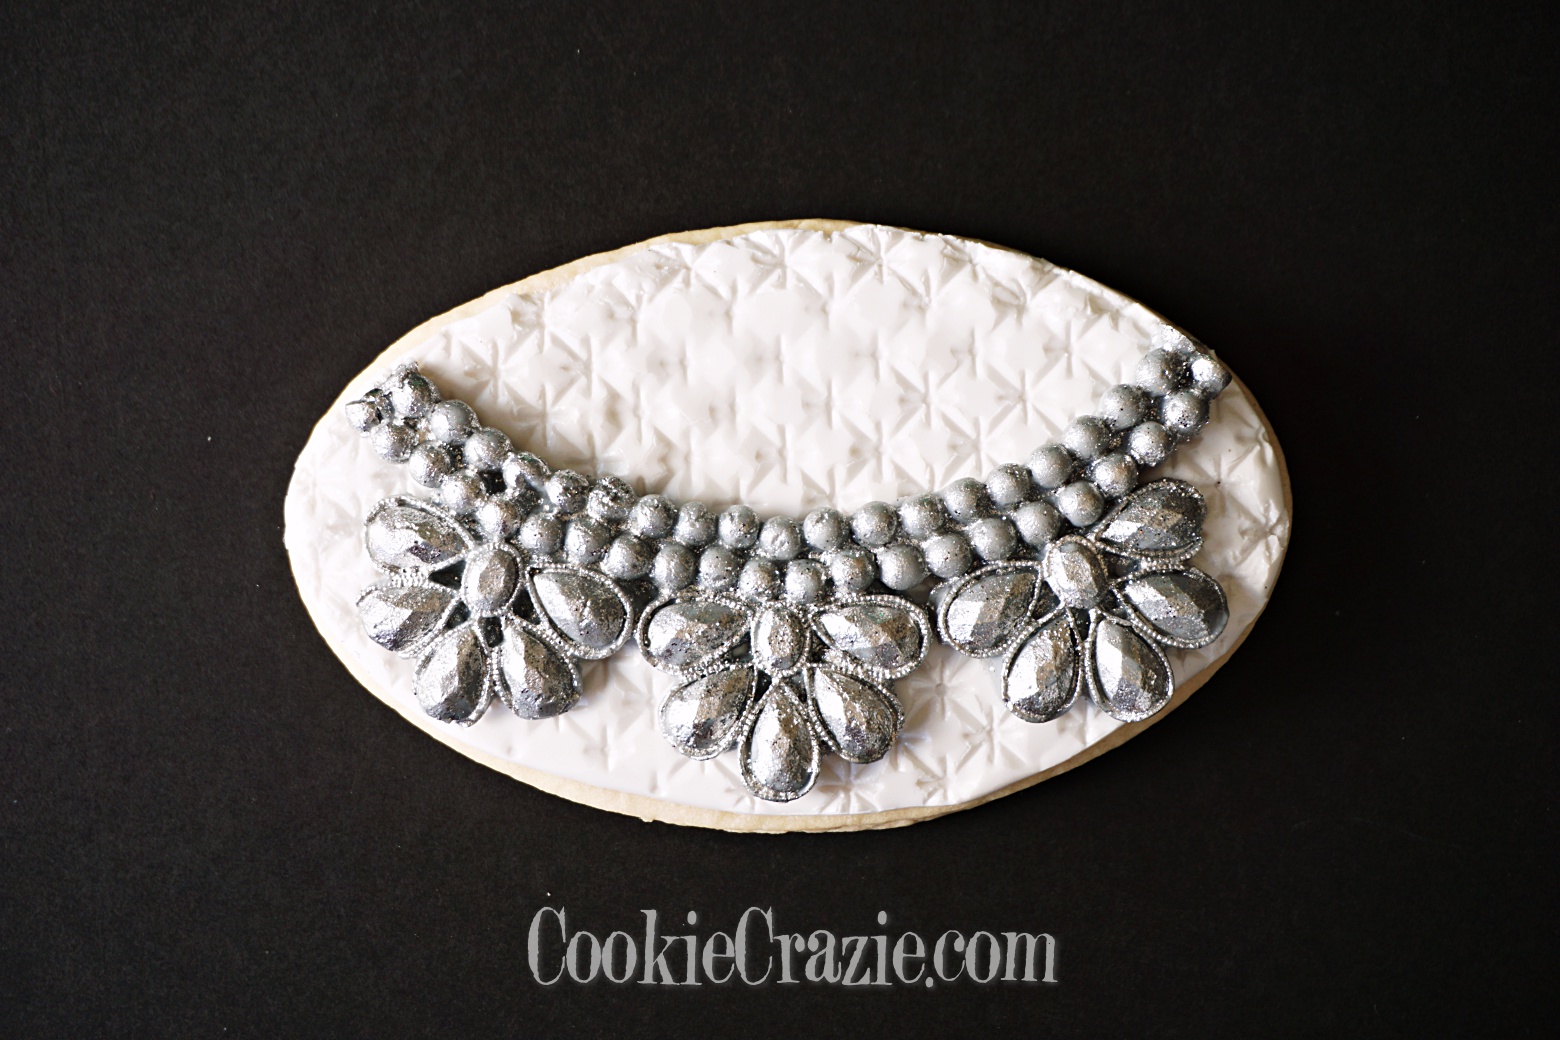  Silver Jewelry Decorated Sugar Cookie YouTube video  HERE  